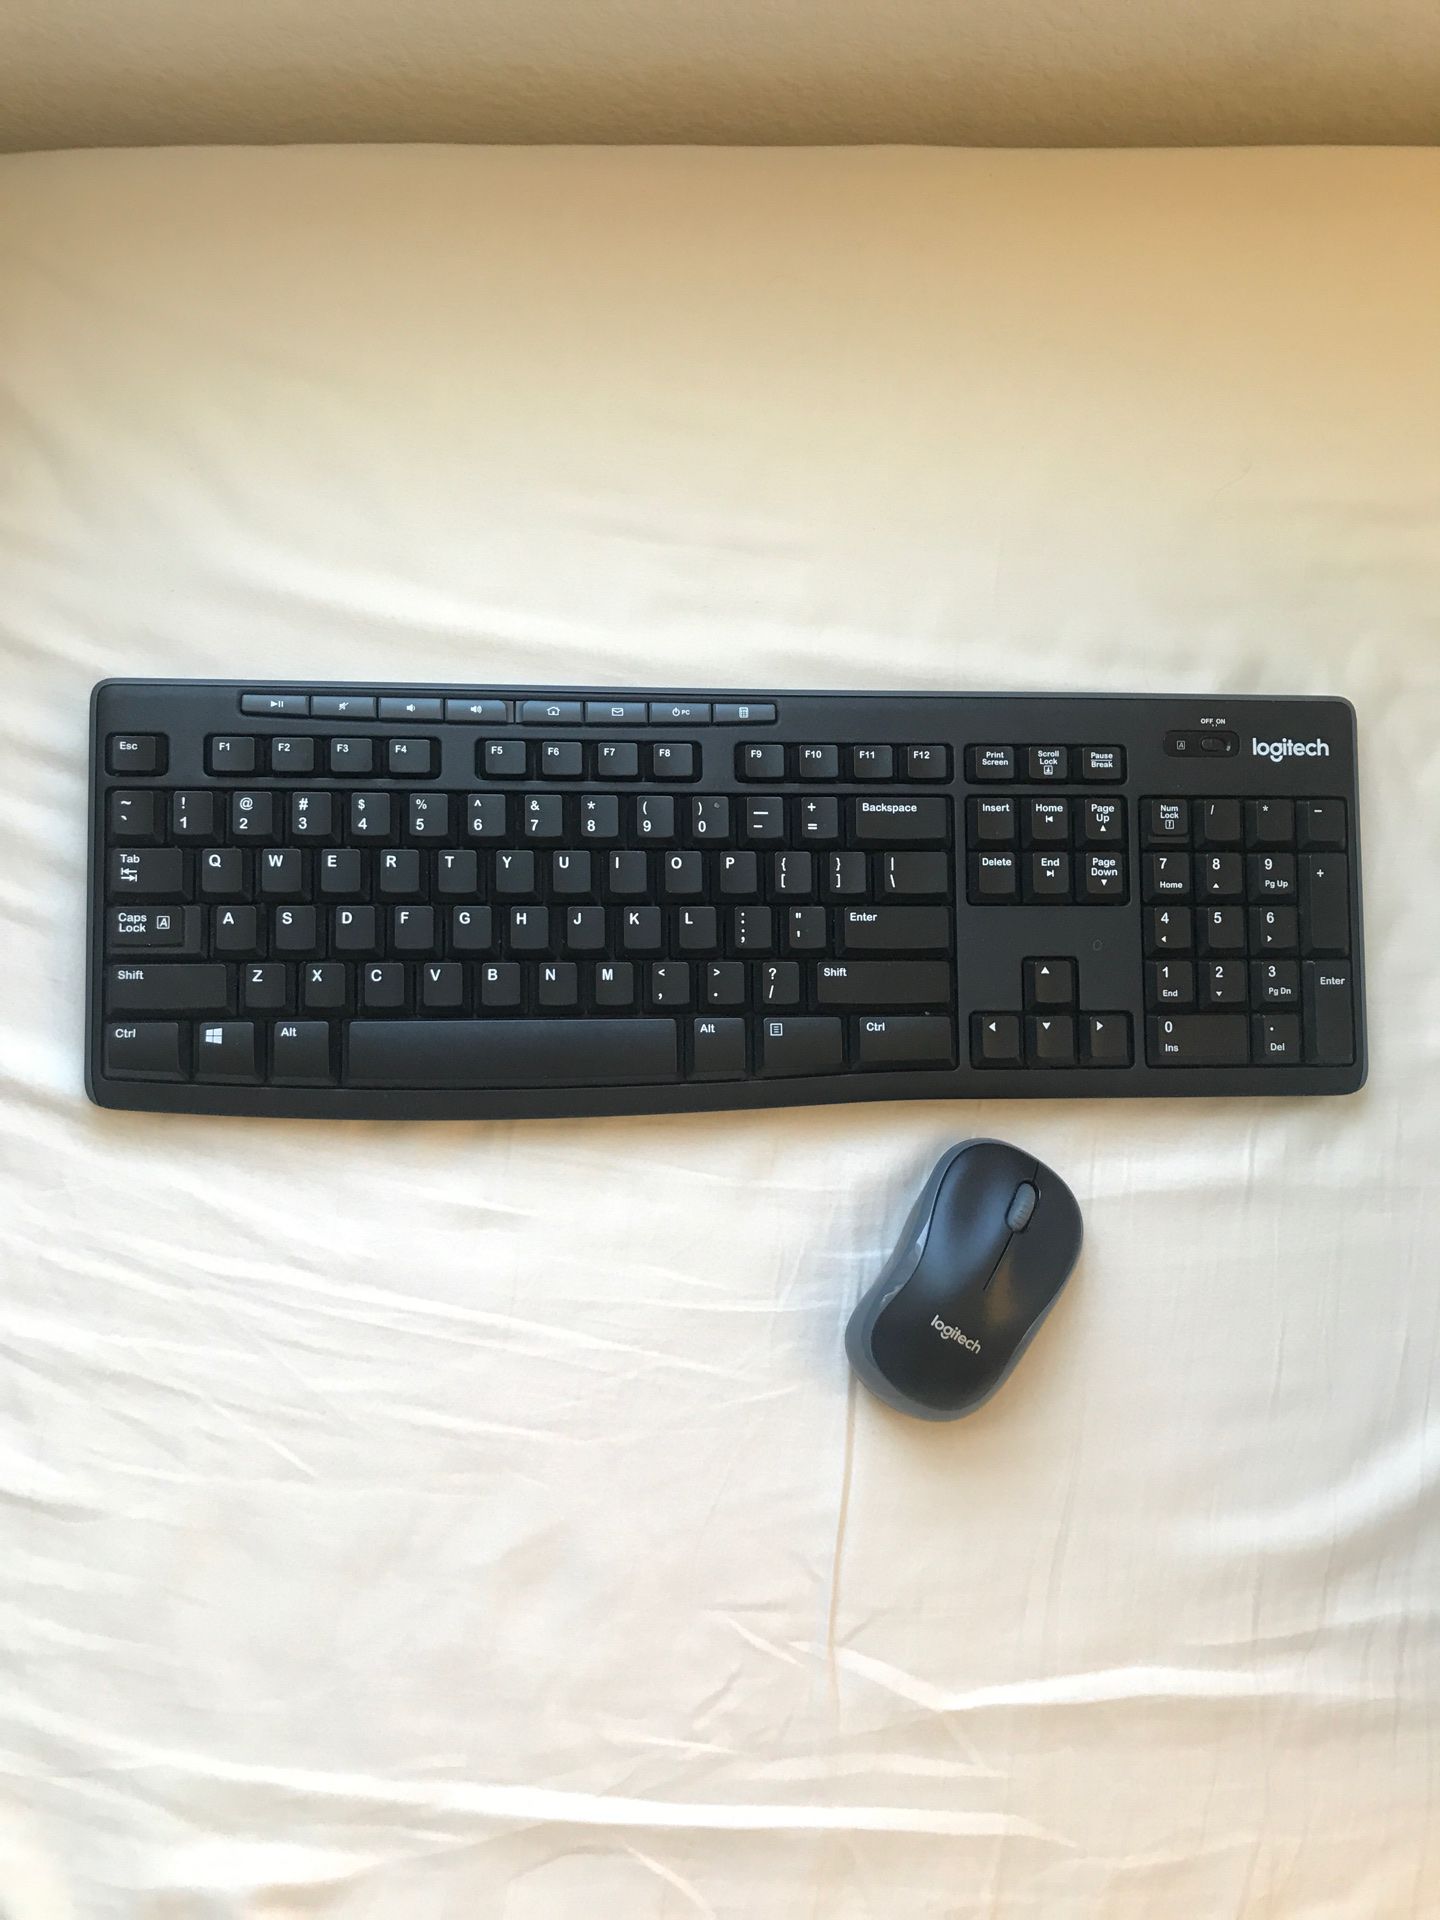 Wireless USB mouse and keyboard